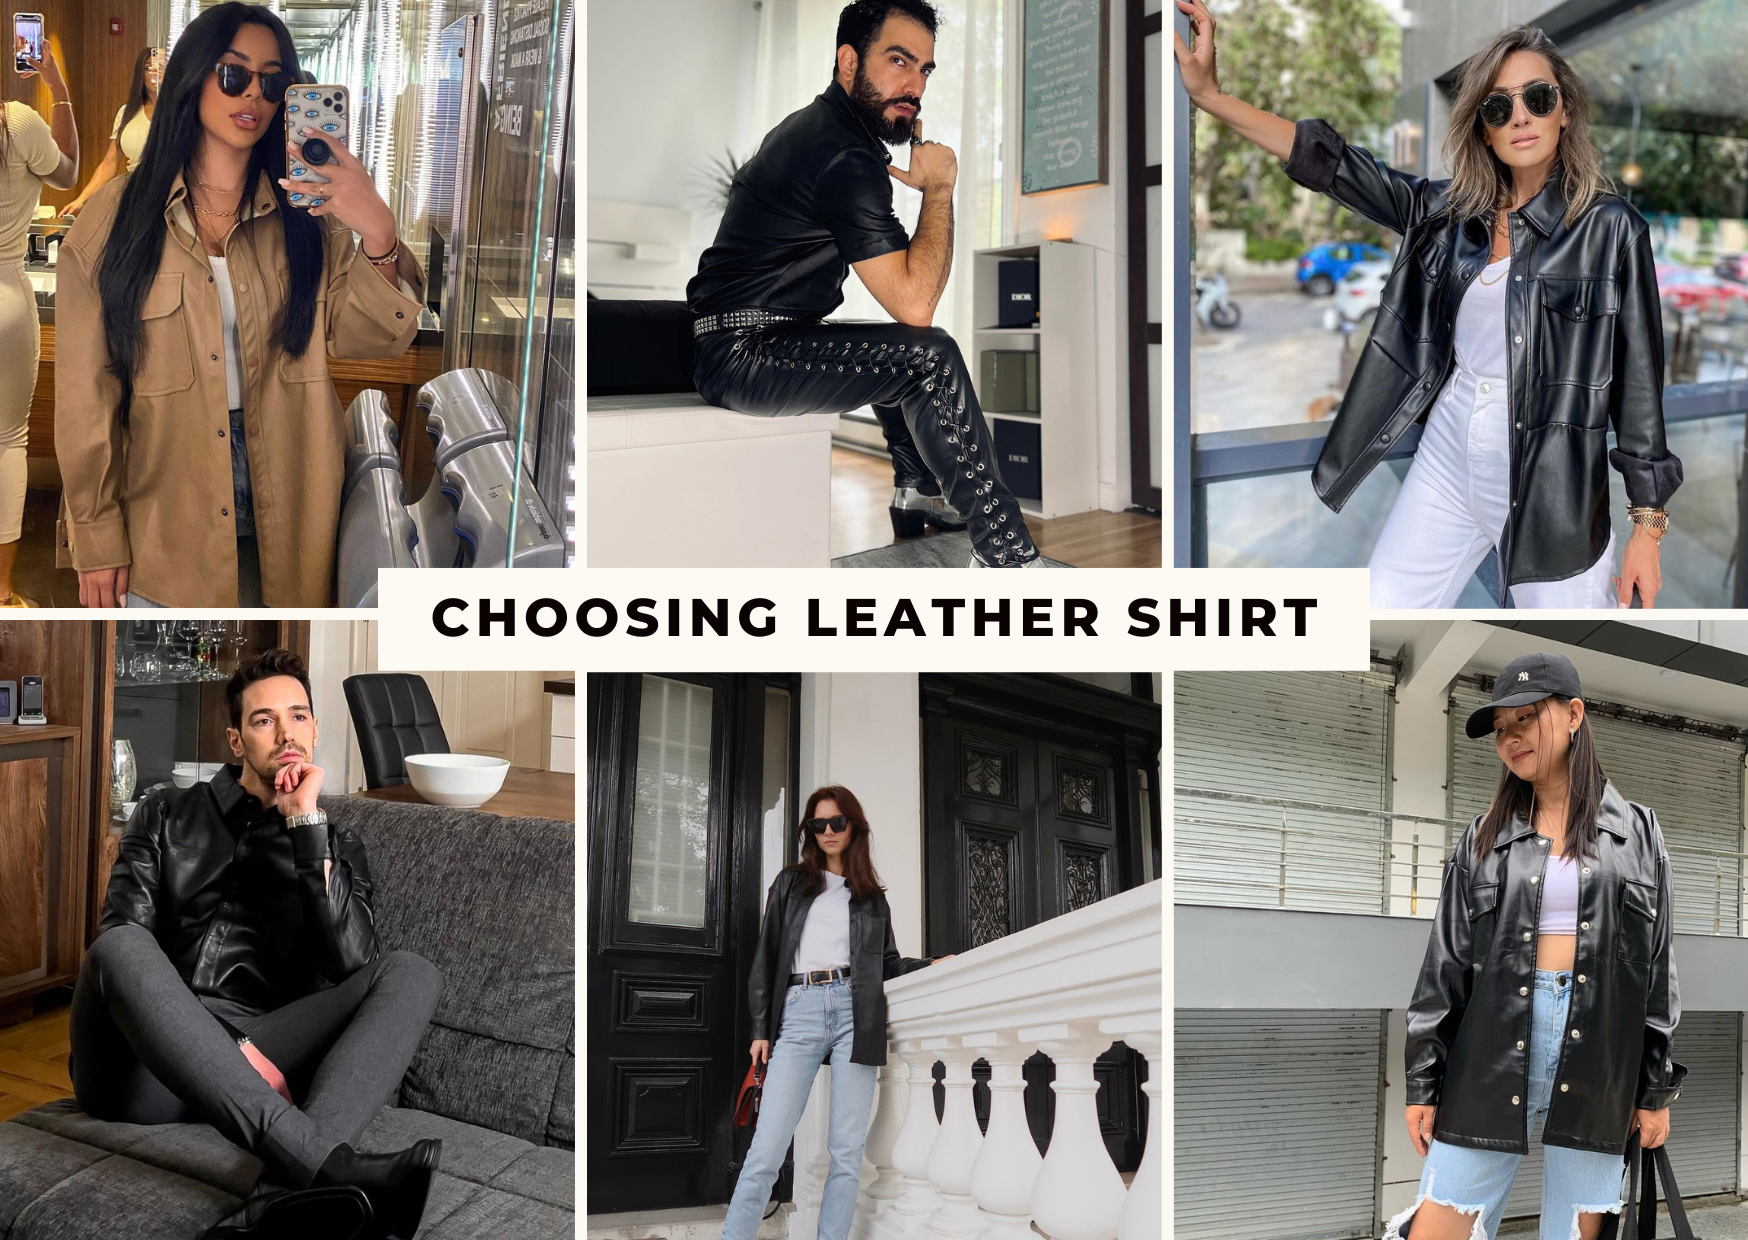 8 Factor to Consider When Choosing a Leather Shirt